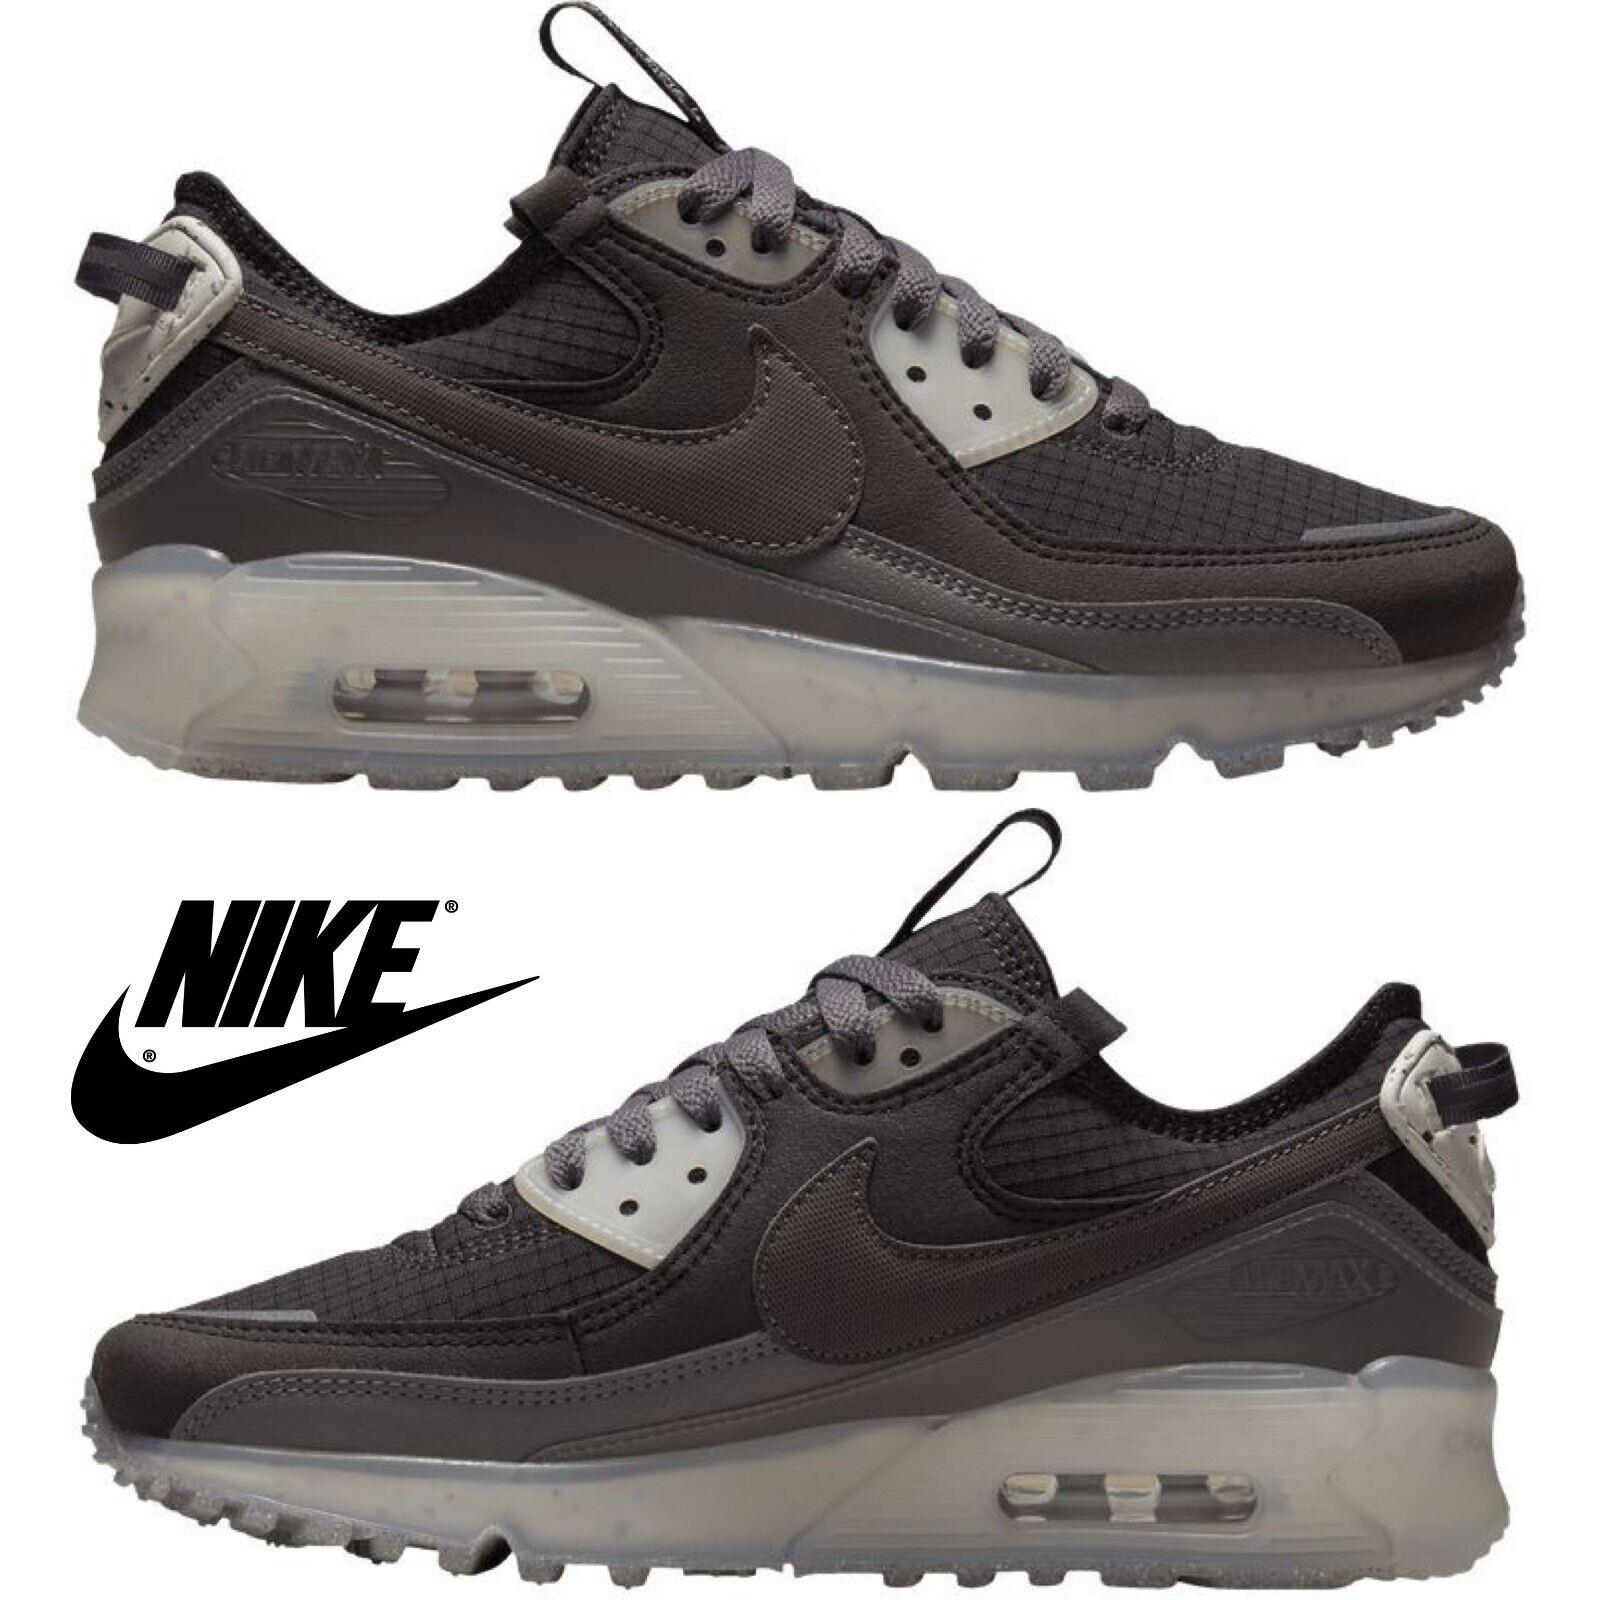 Nike Air Max Terrascape 90 Women s Sneakers Casual Shoes Premium Running Sport